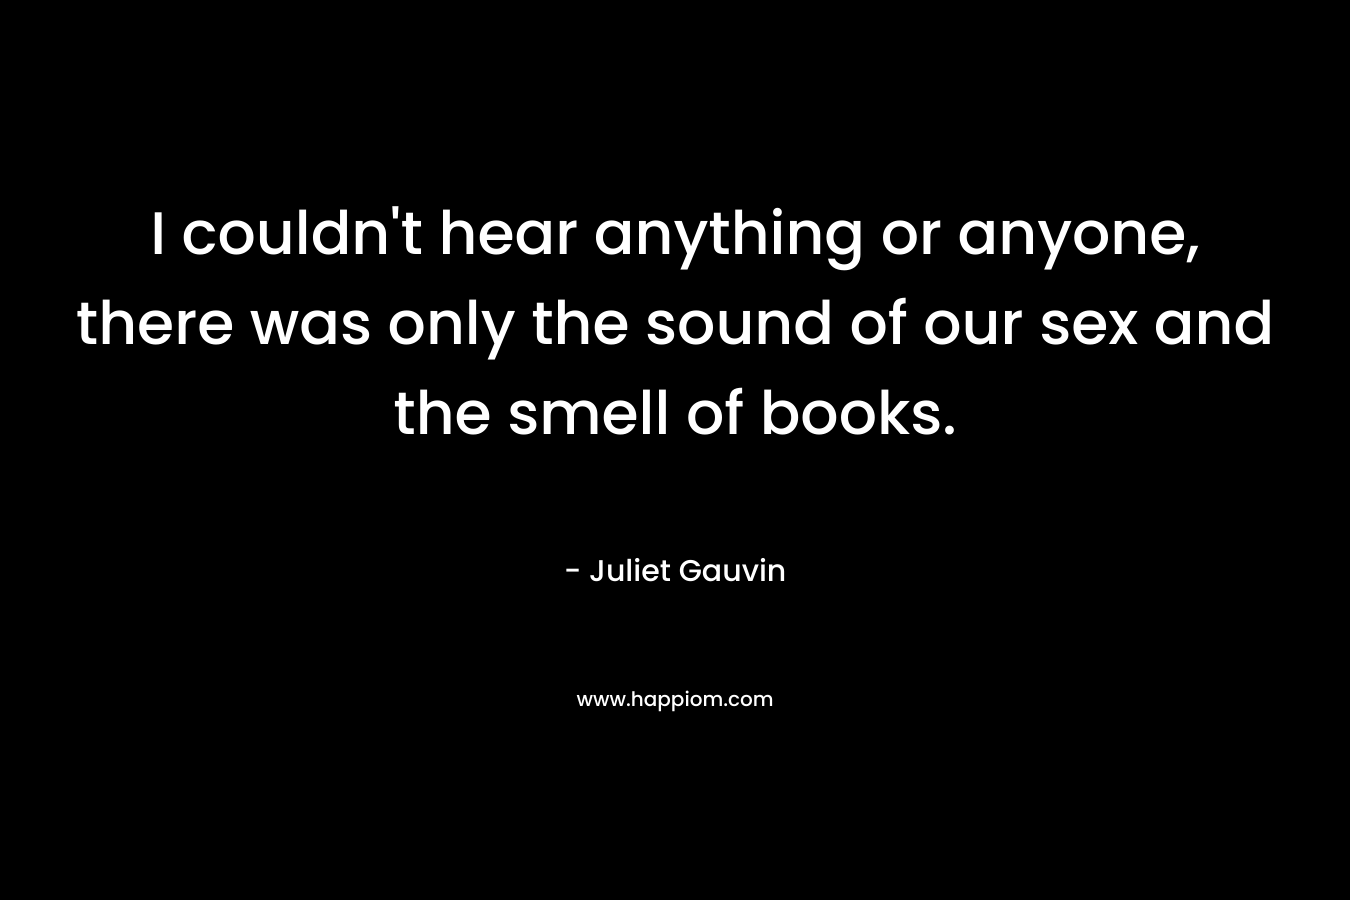 I couldn't hear anything or anyone, there was only the sound of our sex and the smell of books.